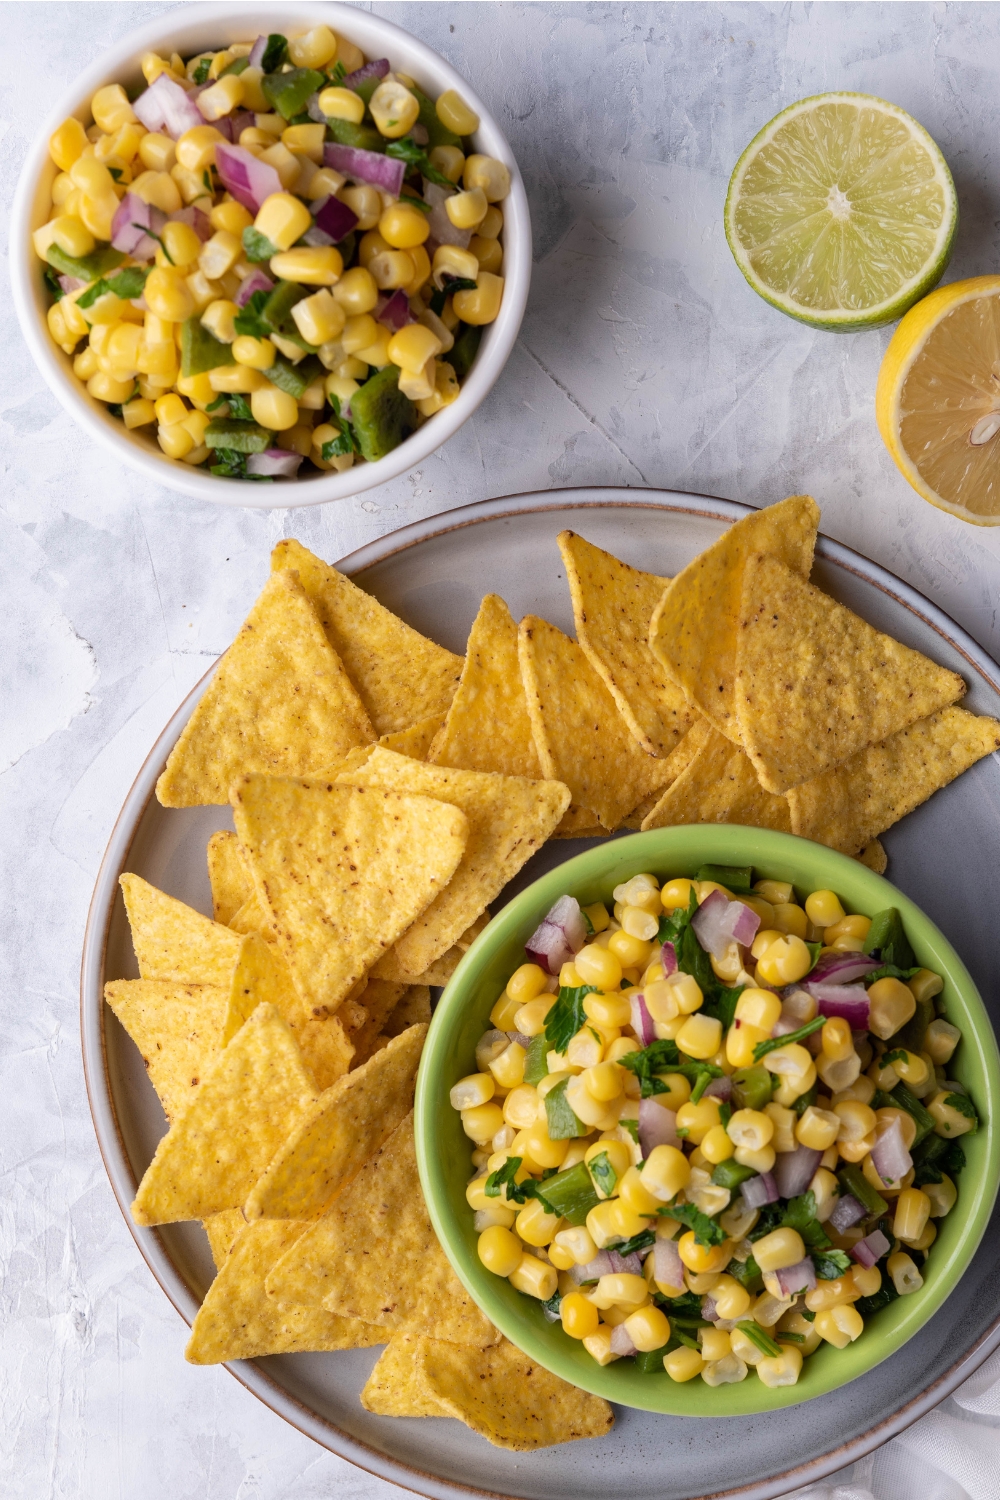 An overhead view of a small dip bowl with corn salsa and tortilla chips on the side of it. A second bowl with corn salsa is next to the serving tray.